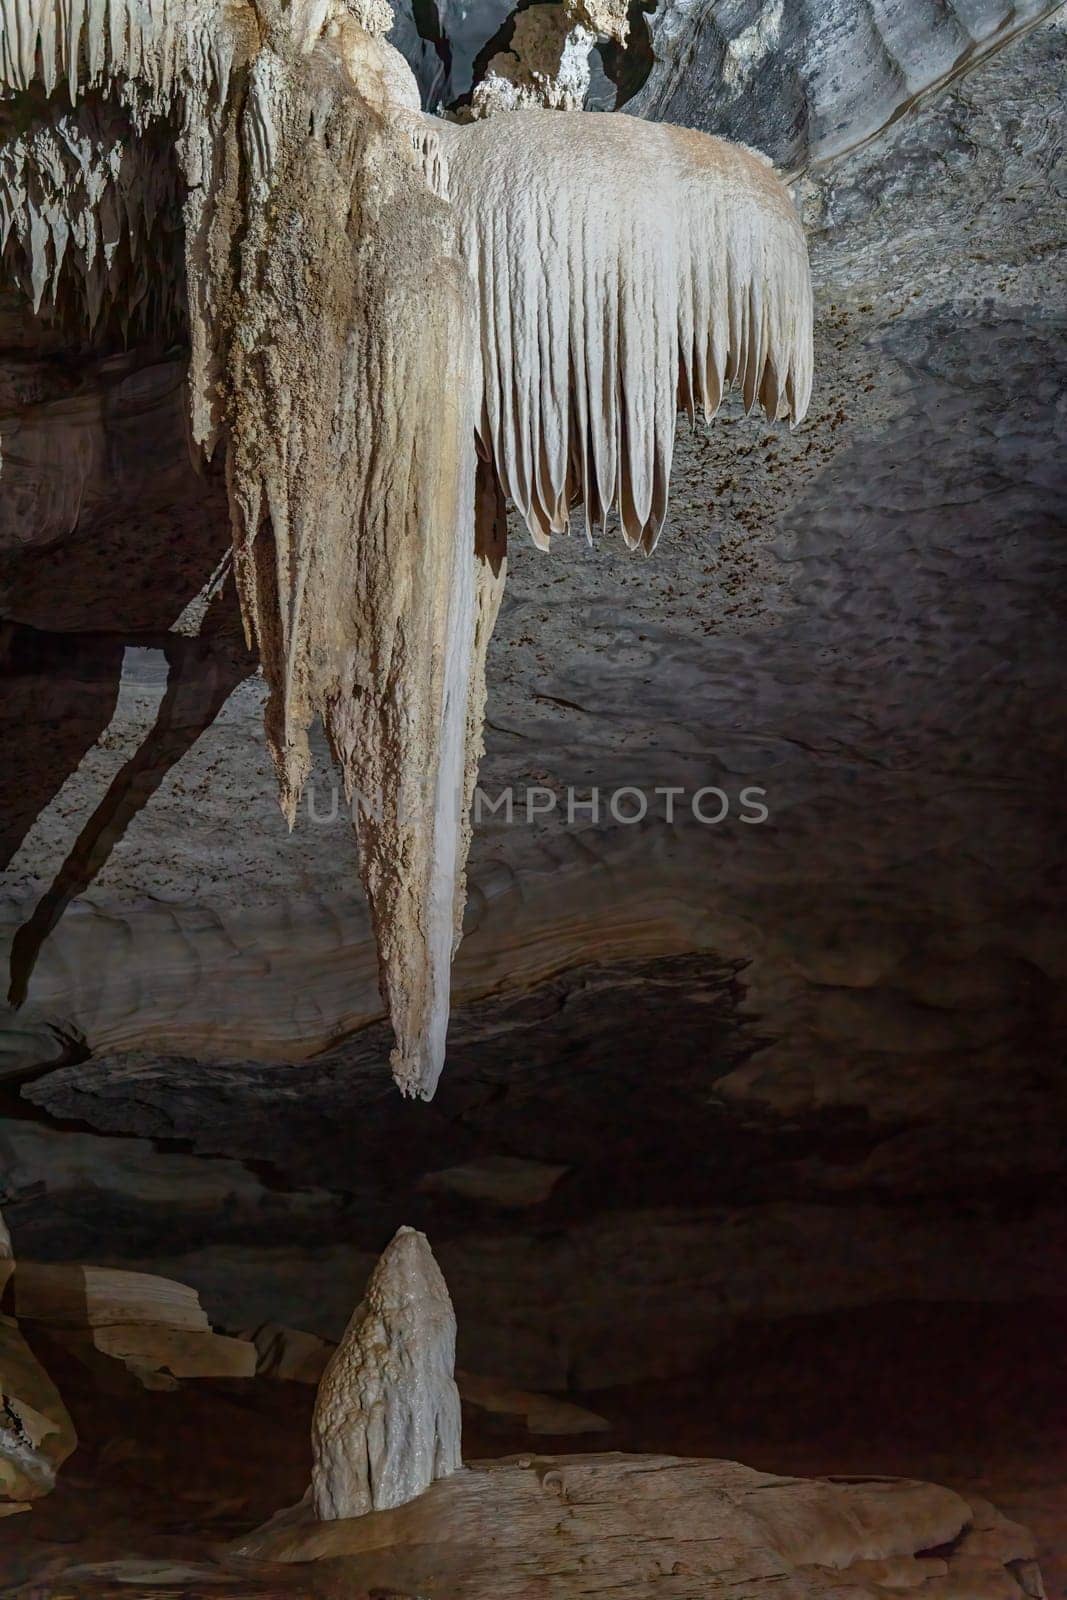 Majestic Stalactite and Stalagmite Formation in a Cave by FerradalFCG